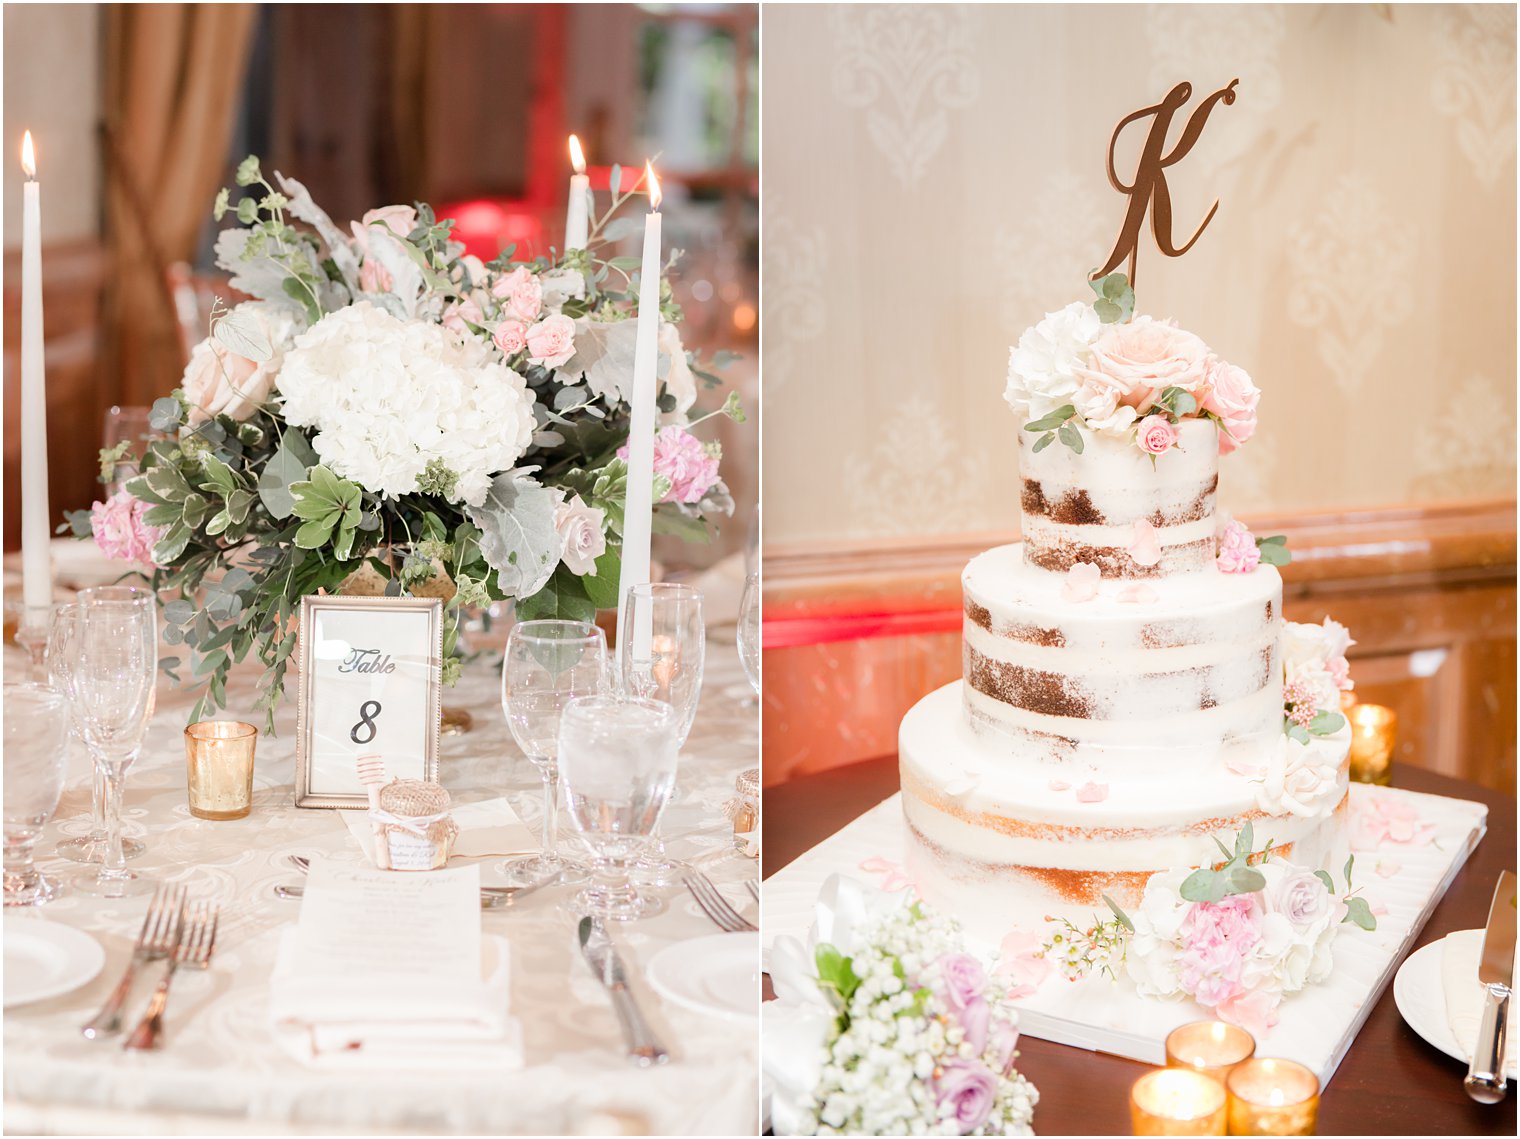 Wedding reception and cake at the Grain House at the Olde Mill Inn in Basking Ridge, NJ